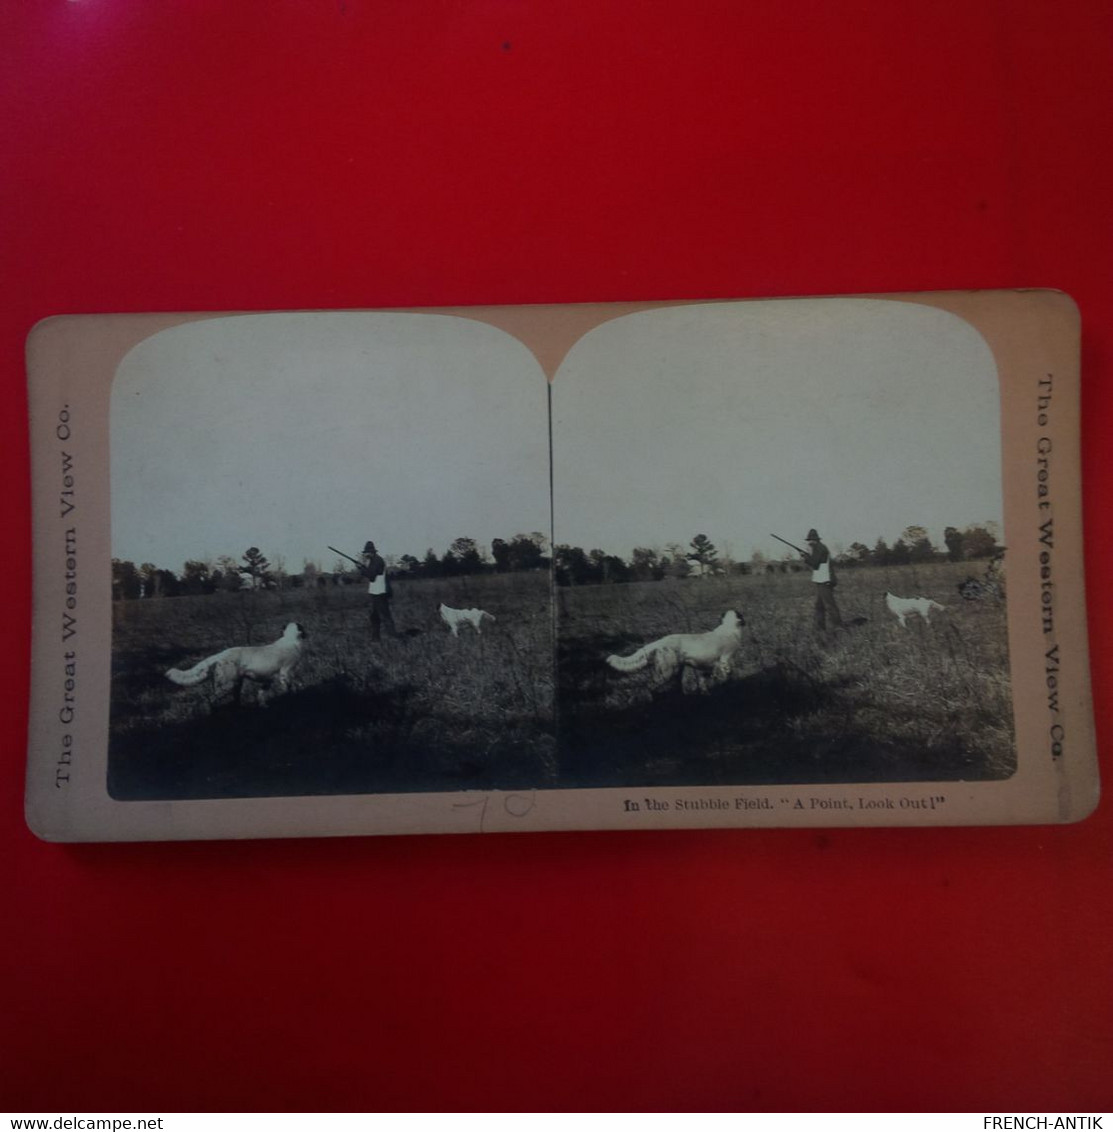 PHOTO STEREO THE GREAT WESTERN IN THE STUBBLE FIELD A POINT LOOK OUT ! CHASSEUR - Stereo-Photographie